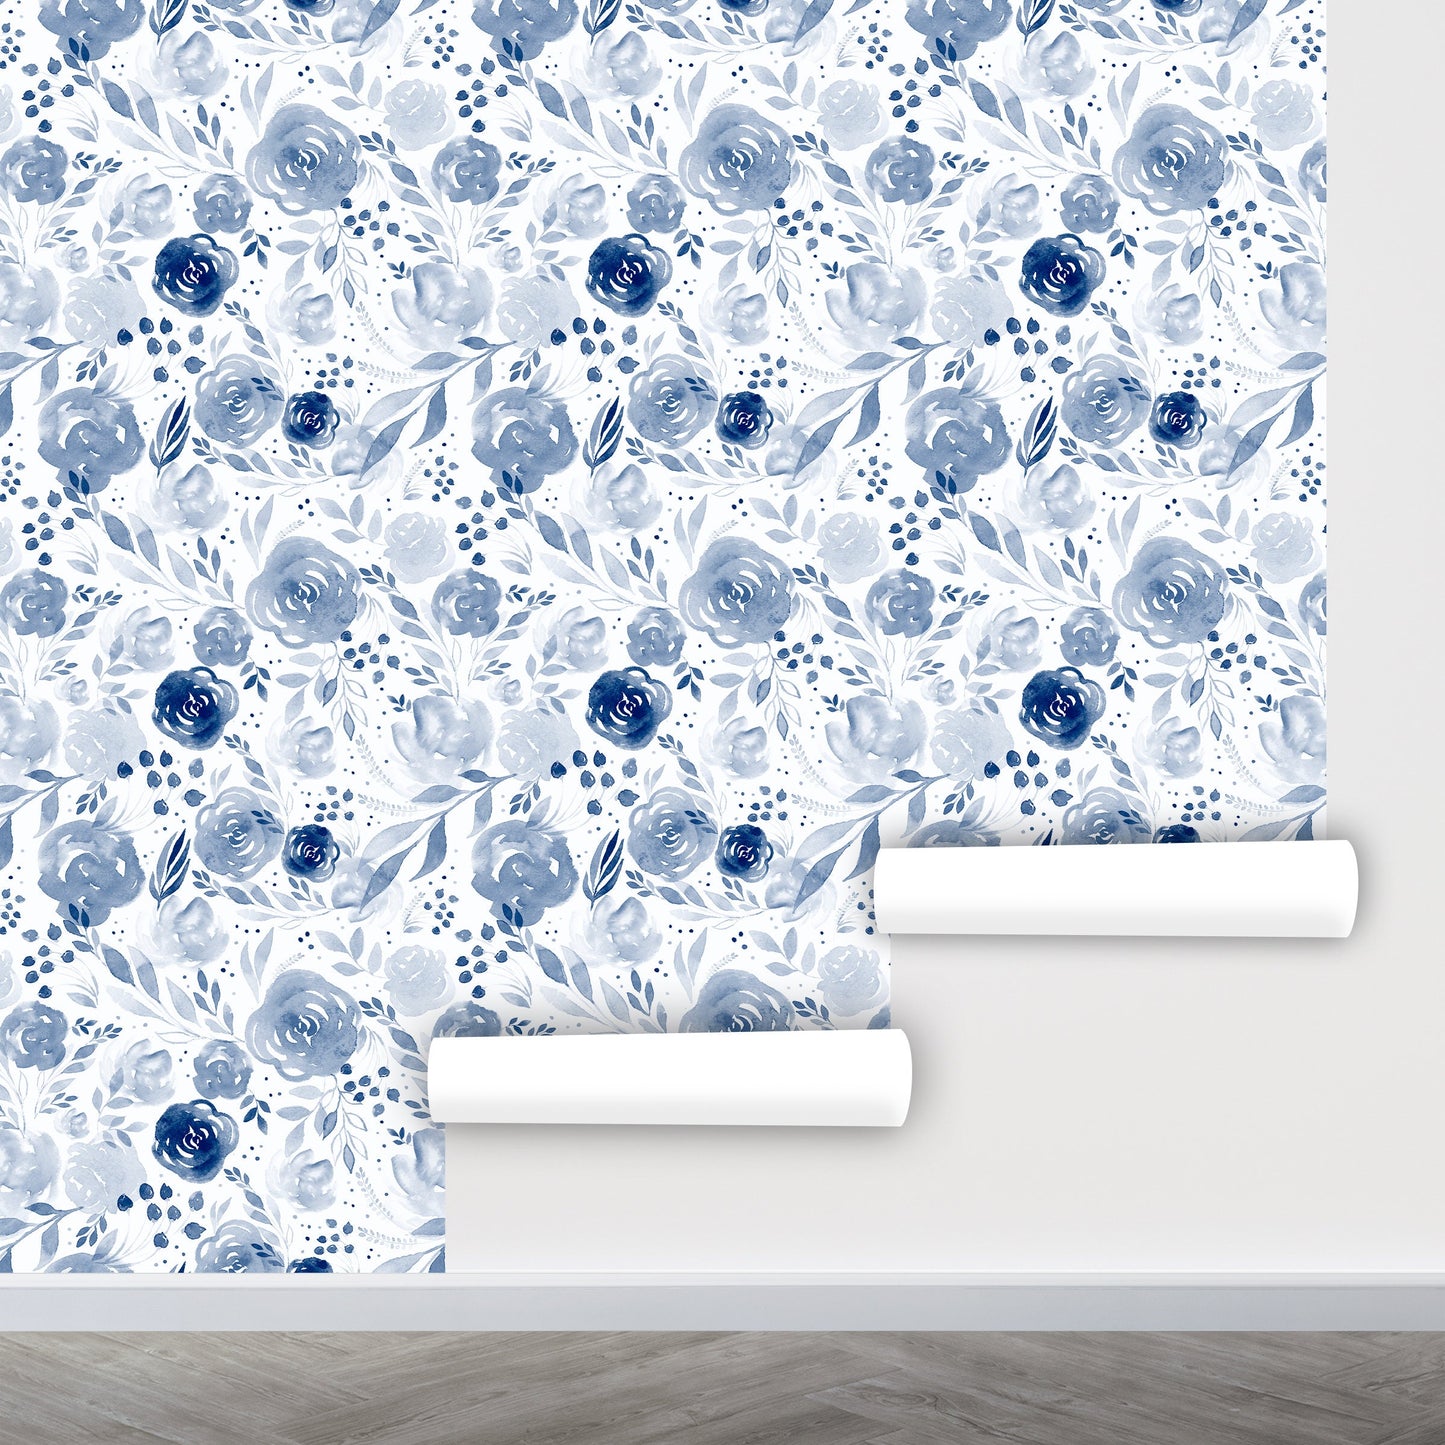 Blue Floral Wallpaper Peel and Stick, Blue Rose Wallpaper, Watercolor Wallpaper, Nursery Wallpaper, Removable Wall Paper